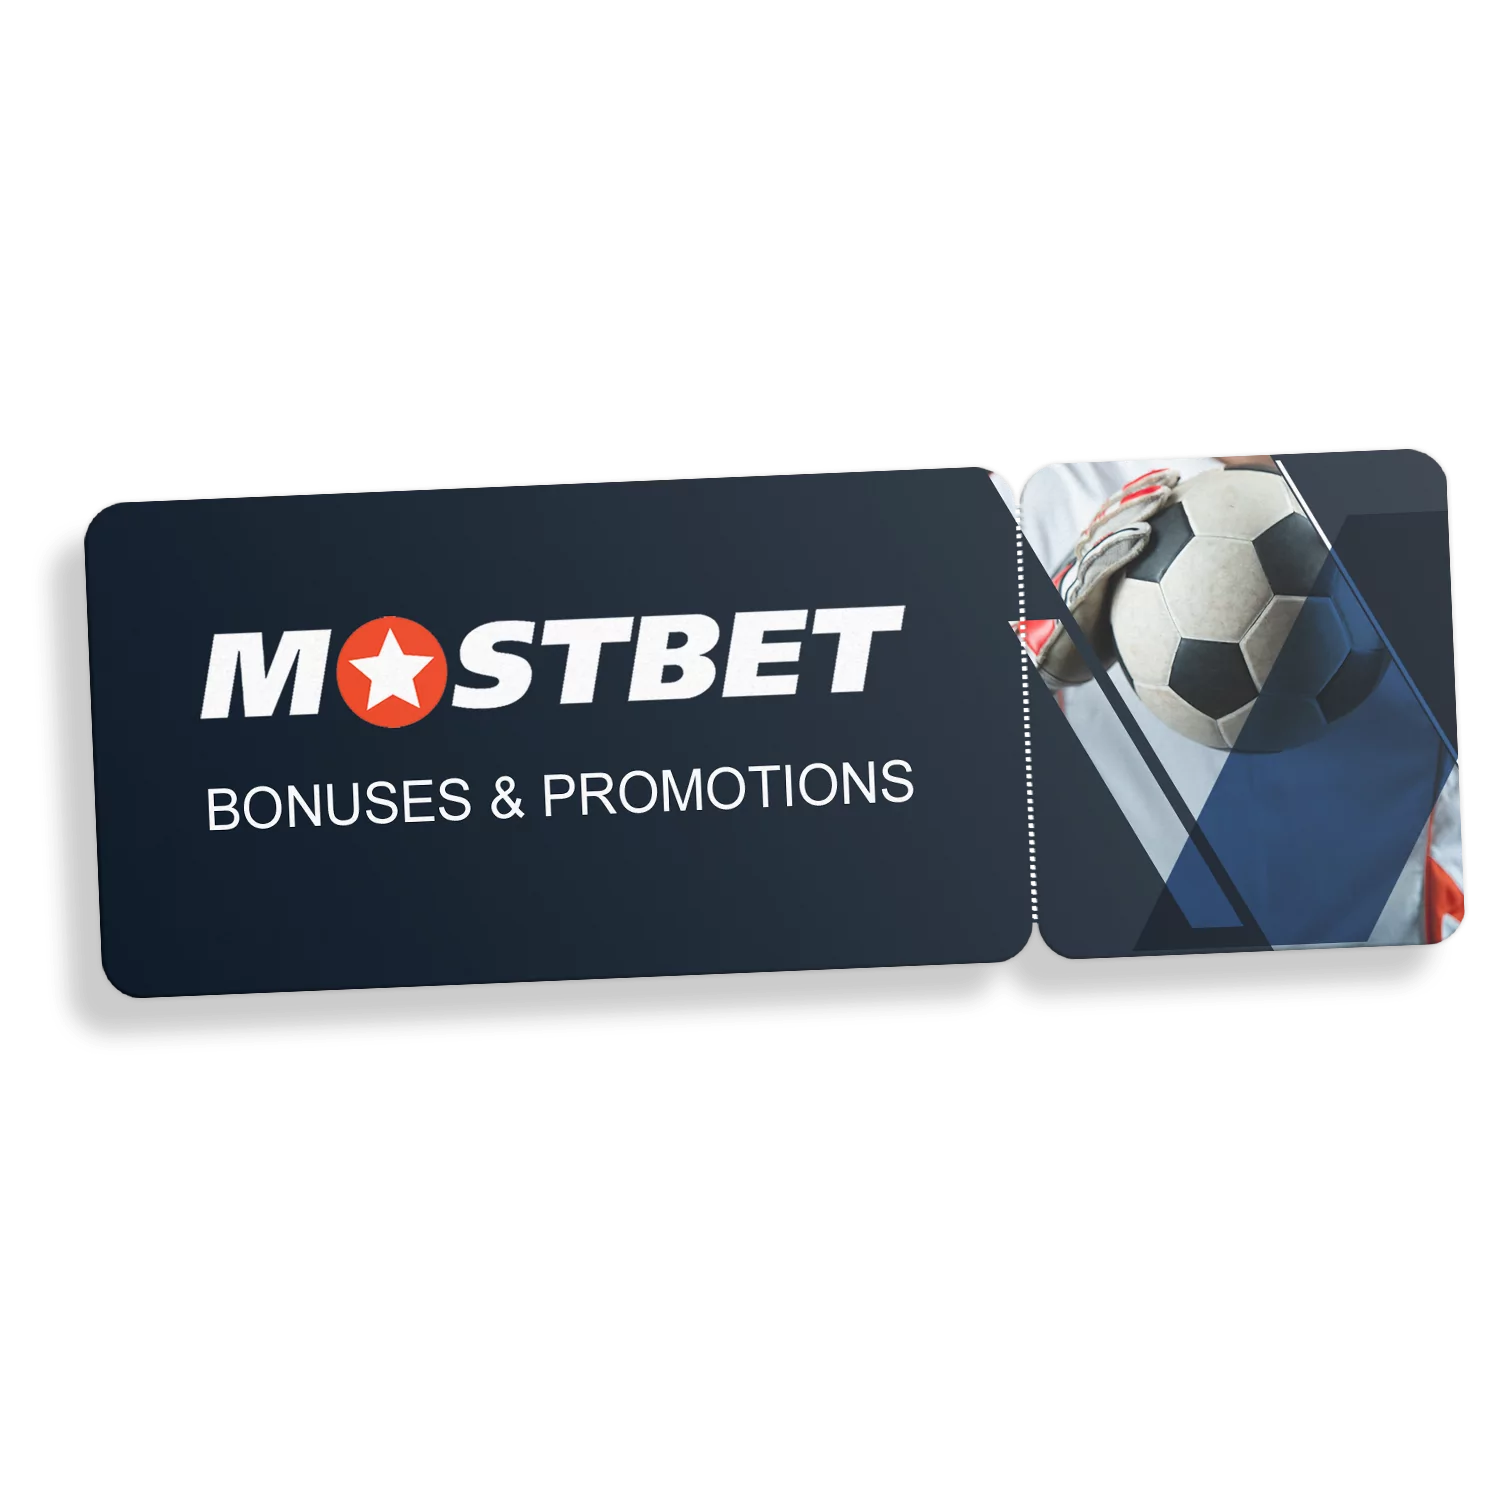 Learn how to use bonuses and promotions of Mostbet for betting.